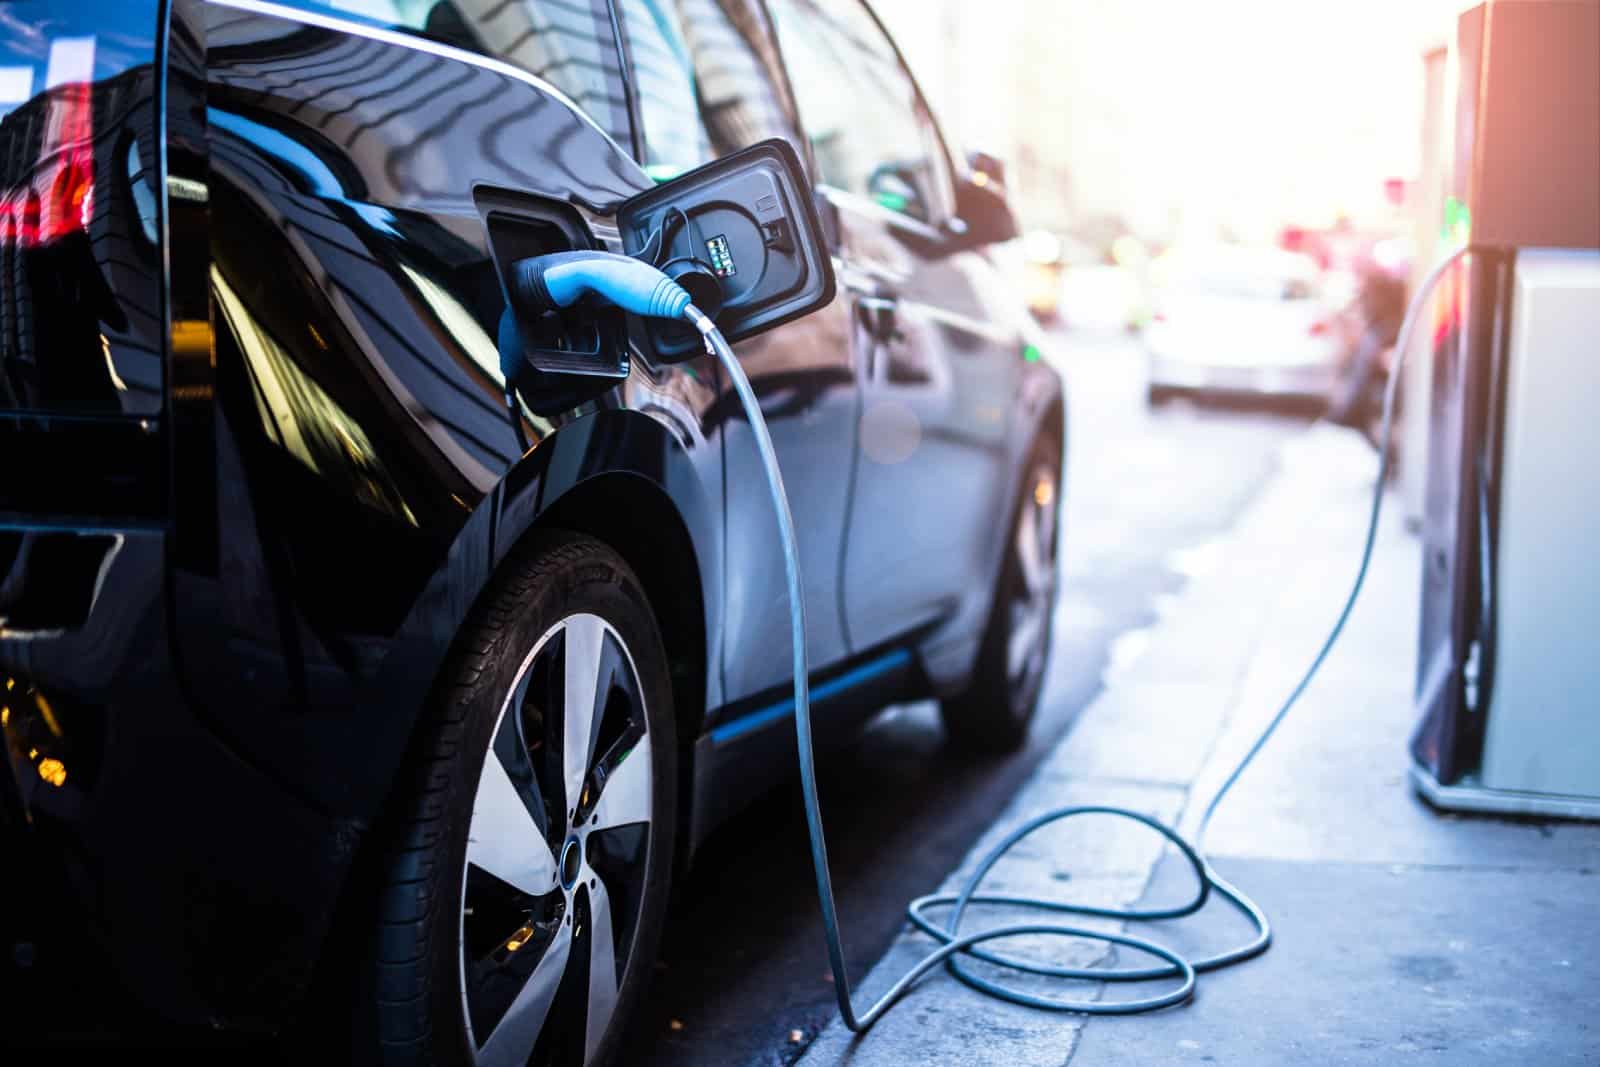 <p class="wp-caption-text">Image Credit: Shutterstock / guteksk7</p>  <p>Driving anything but a hybrid or electric vehicle is looked down upon, and not having a compost bin is akin to a mortal sin.</p>